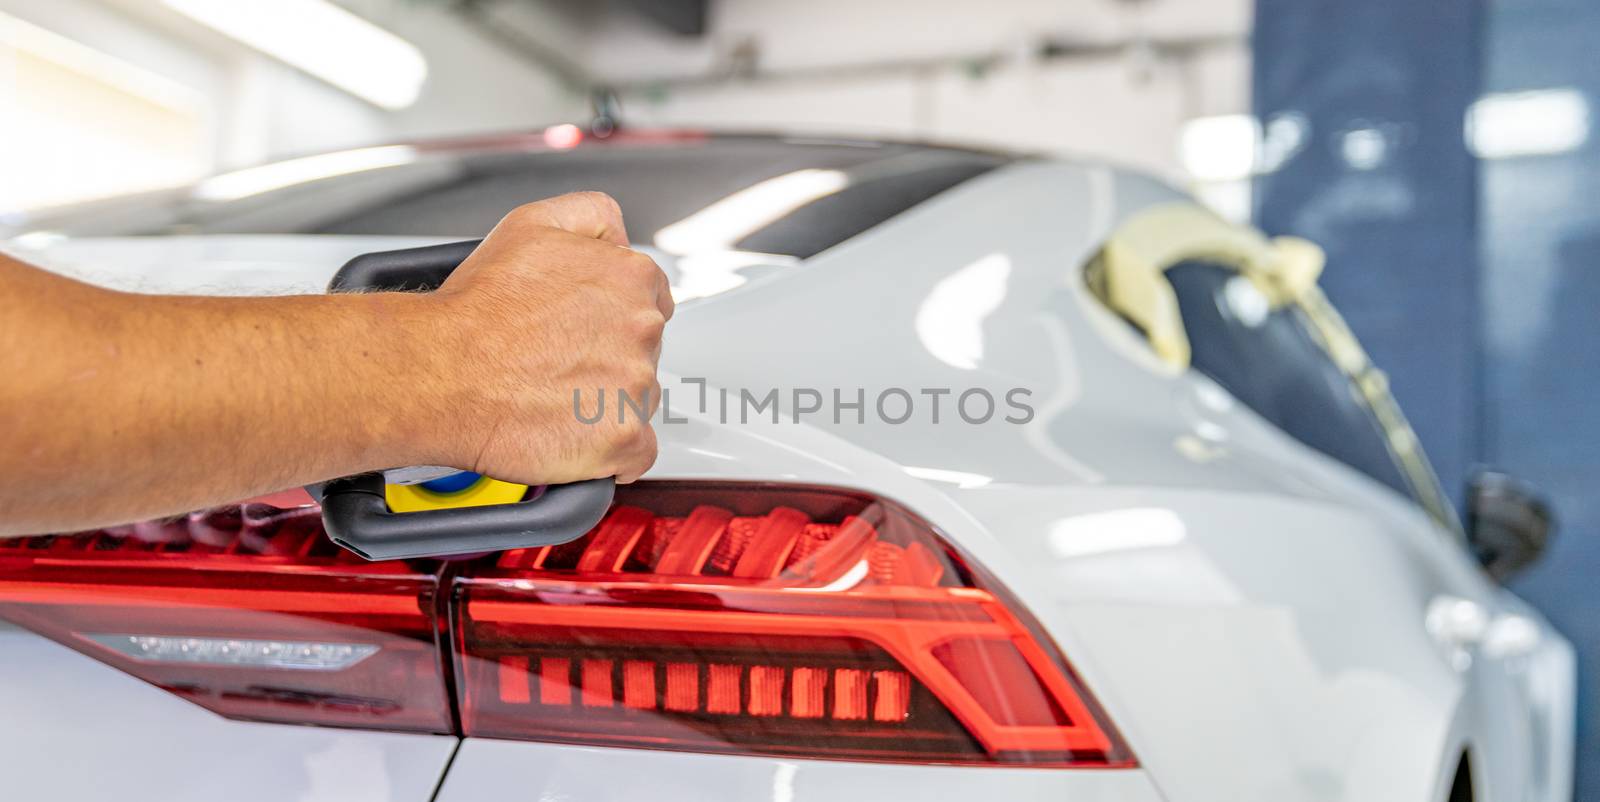 restoring gloss and repairing scratches on car bodies with the help of polishing.